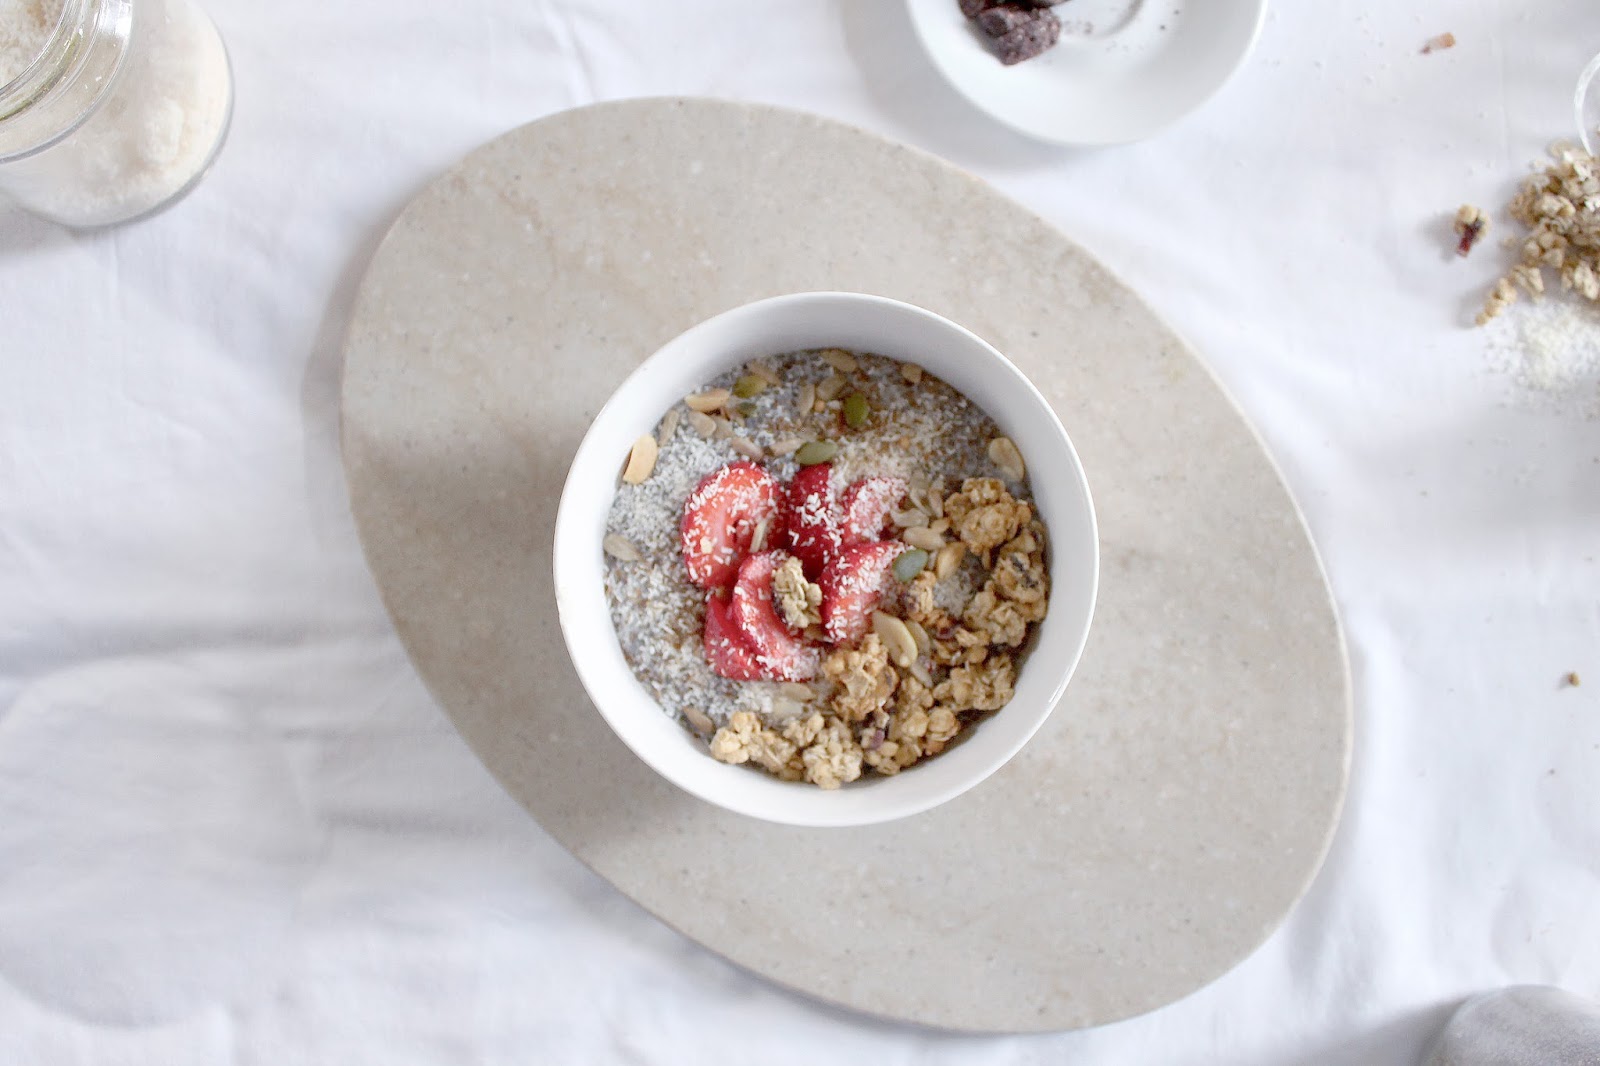 Always dreaming of a creamy dreamy chia seed pudding. This healthy and quick vegan breakfast recipe is also wholesome and healthy giving you so much energy to start the day! Filled with chia seeds, granola clusters, cocoa, coconut, fruits, and more. Best breakfast chia seed pudding recipe.